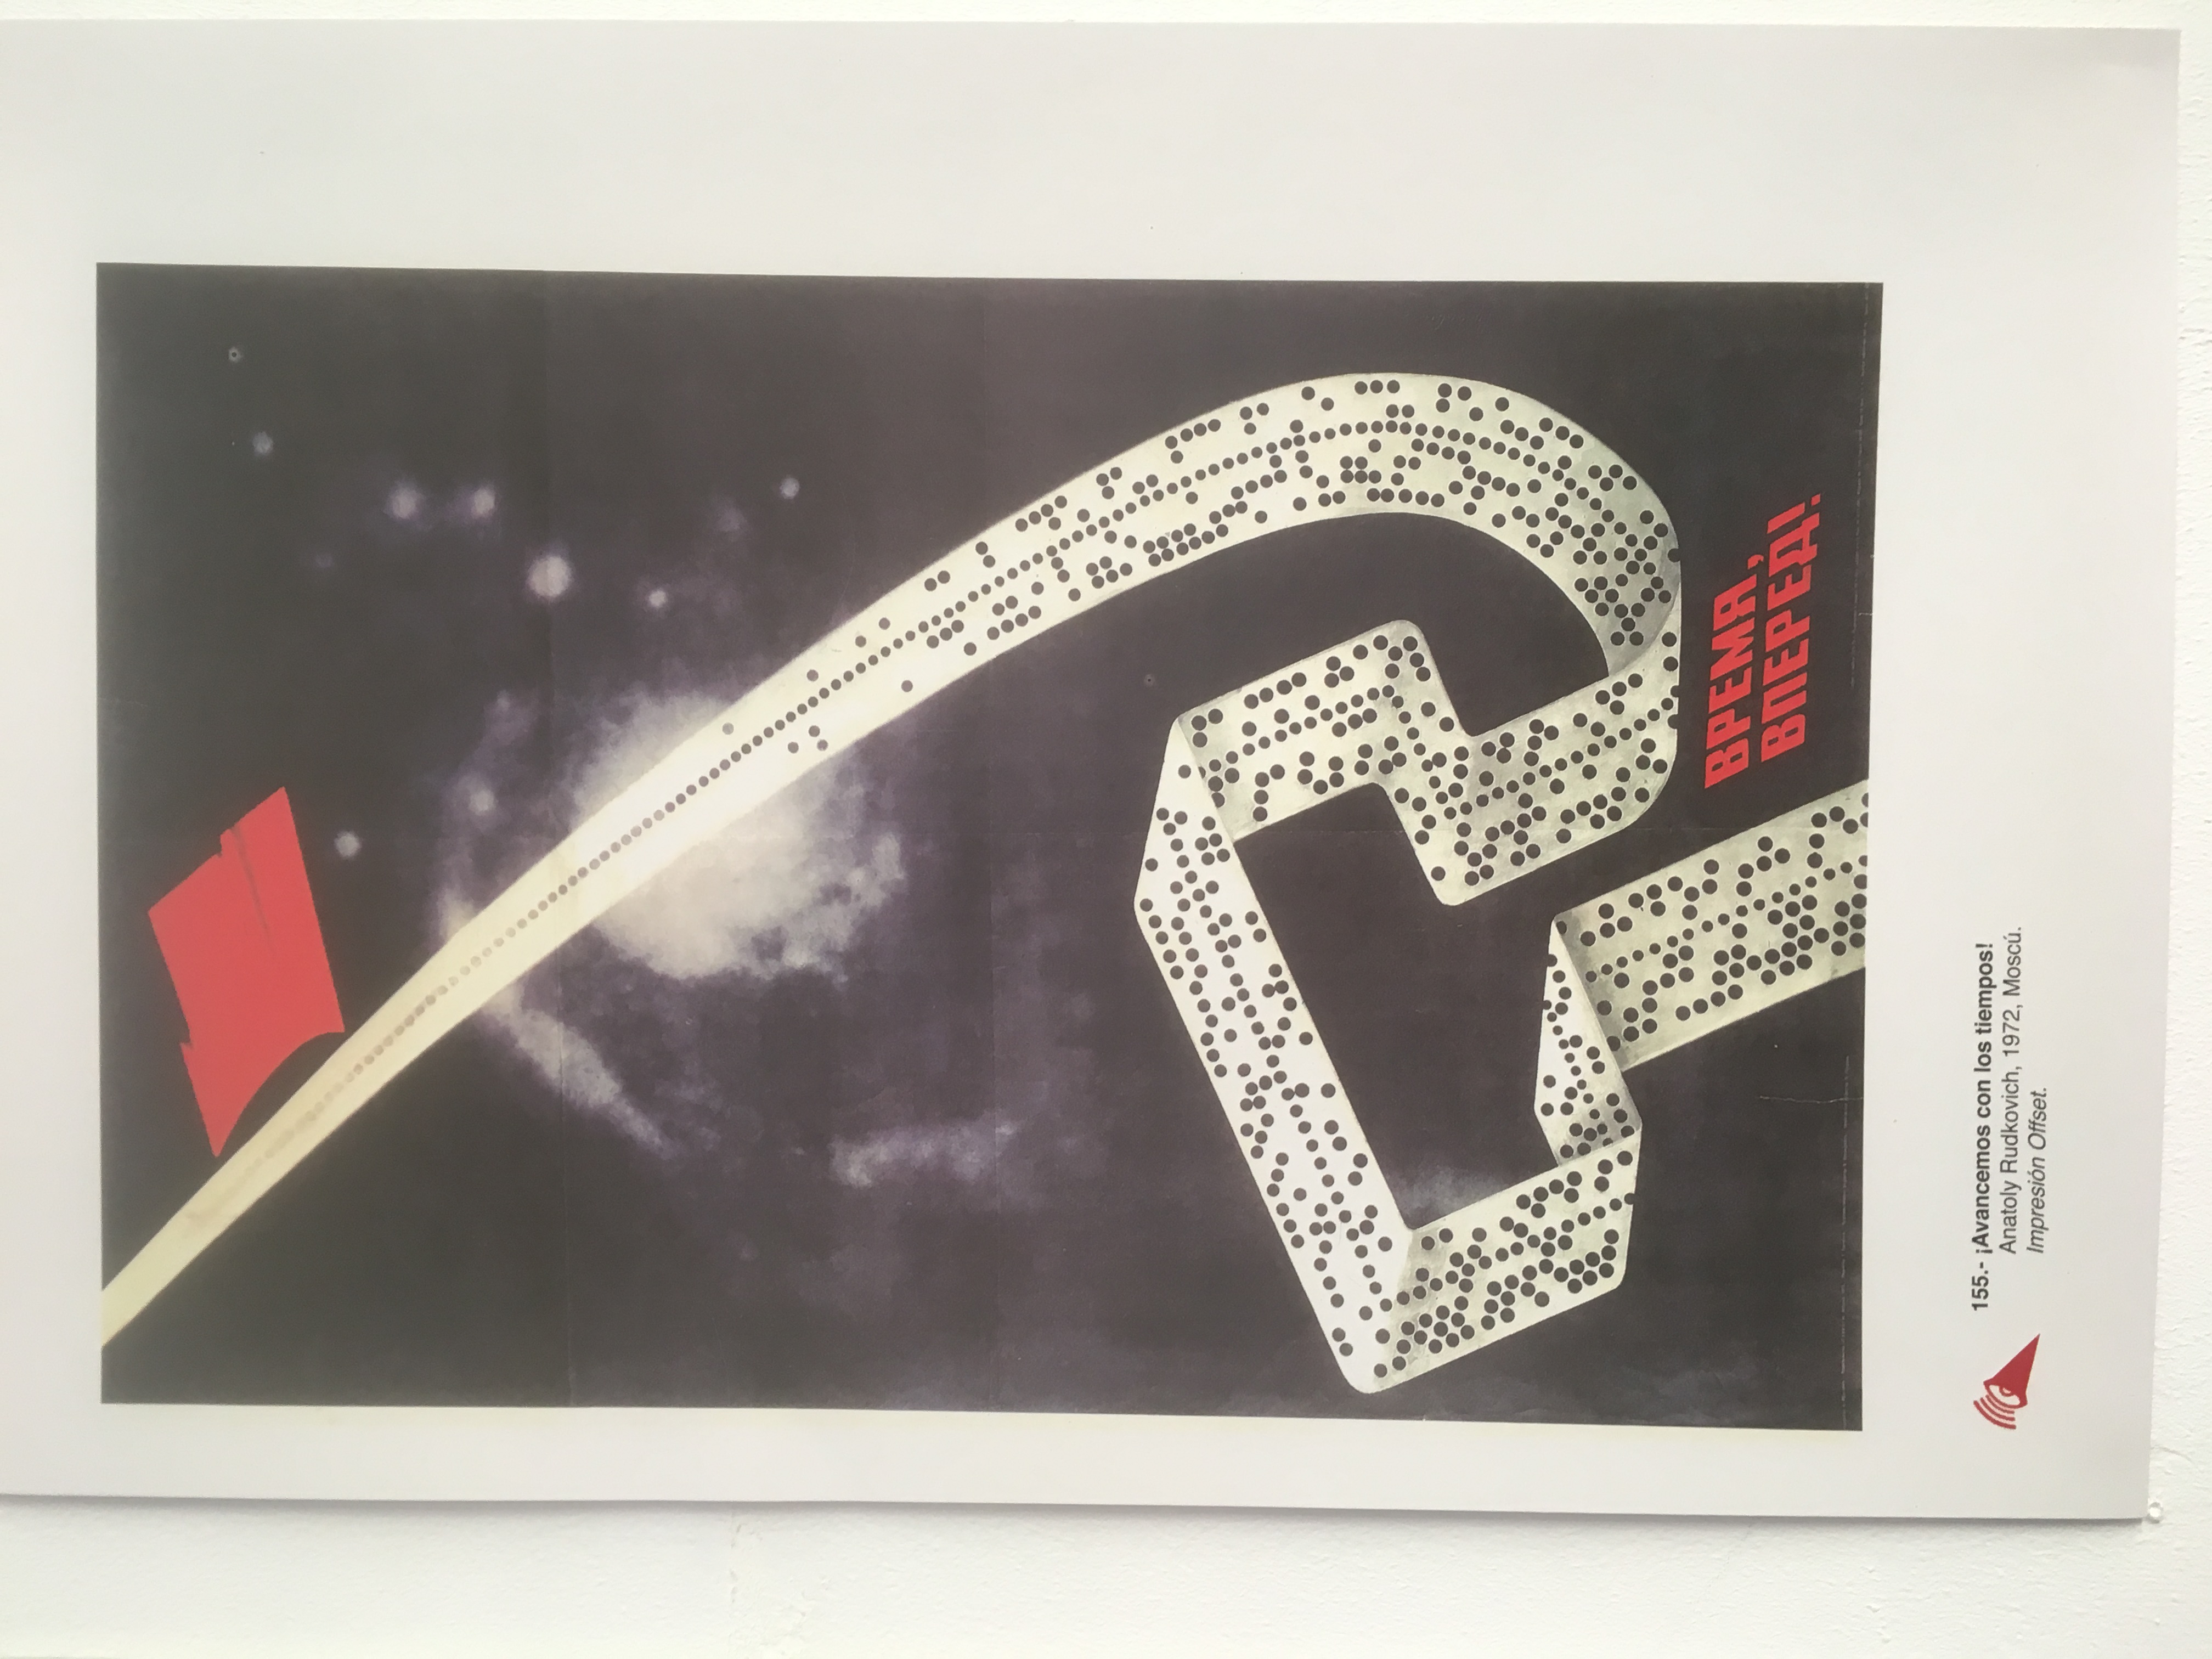 Russian poster depicting hammer and sickle in computer tape